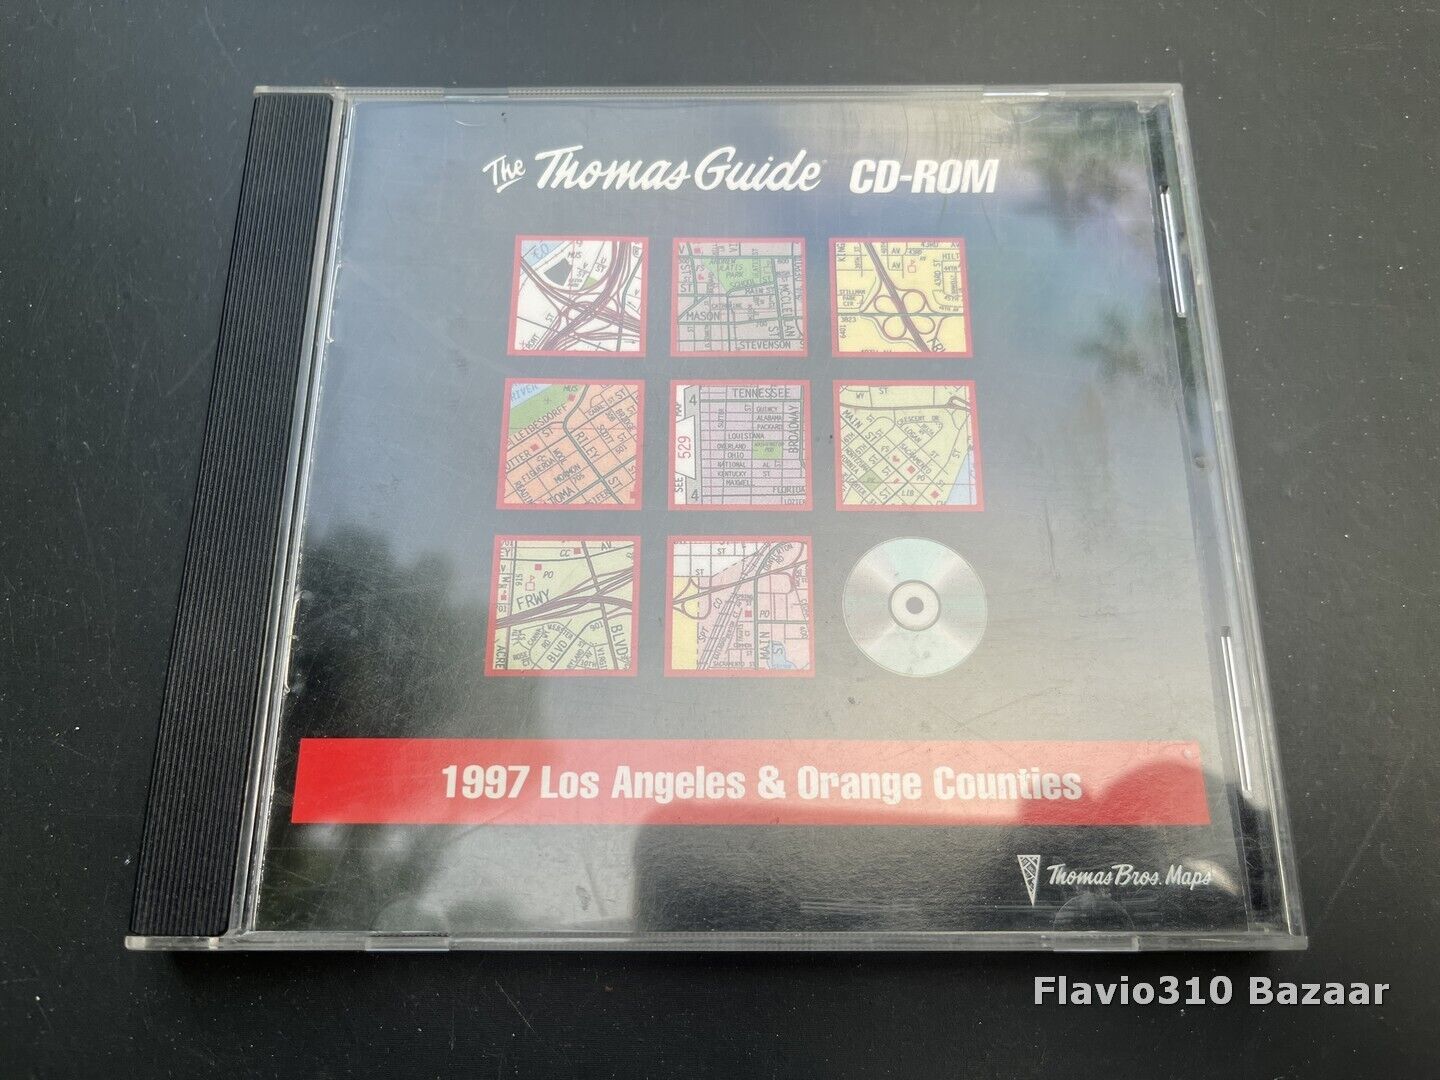 Authentic Vintage The THOMAS GUIDE CD-ROM 1997 Los Angeles & Orange Counties